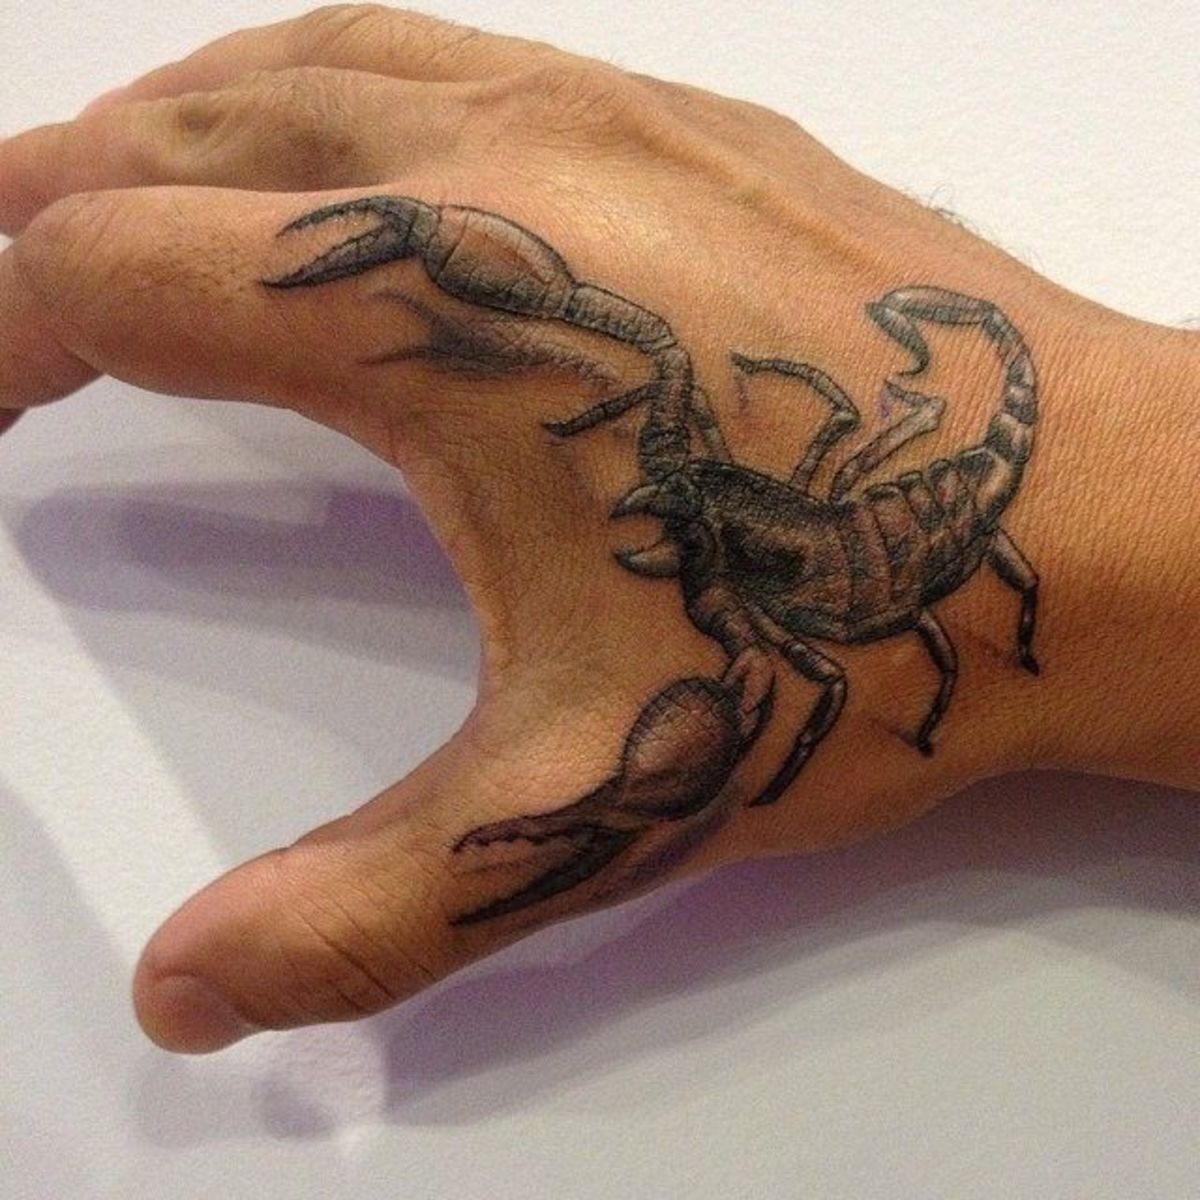 15 Latest And Meaningful Scorpion Tattoo Designs  Ideas